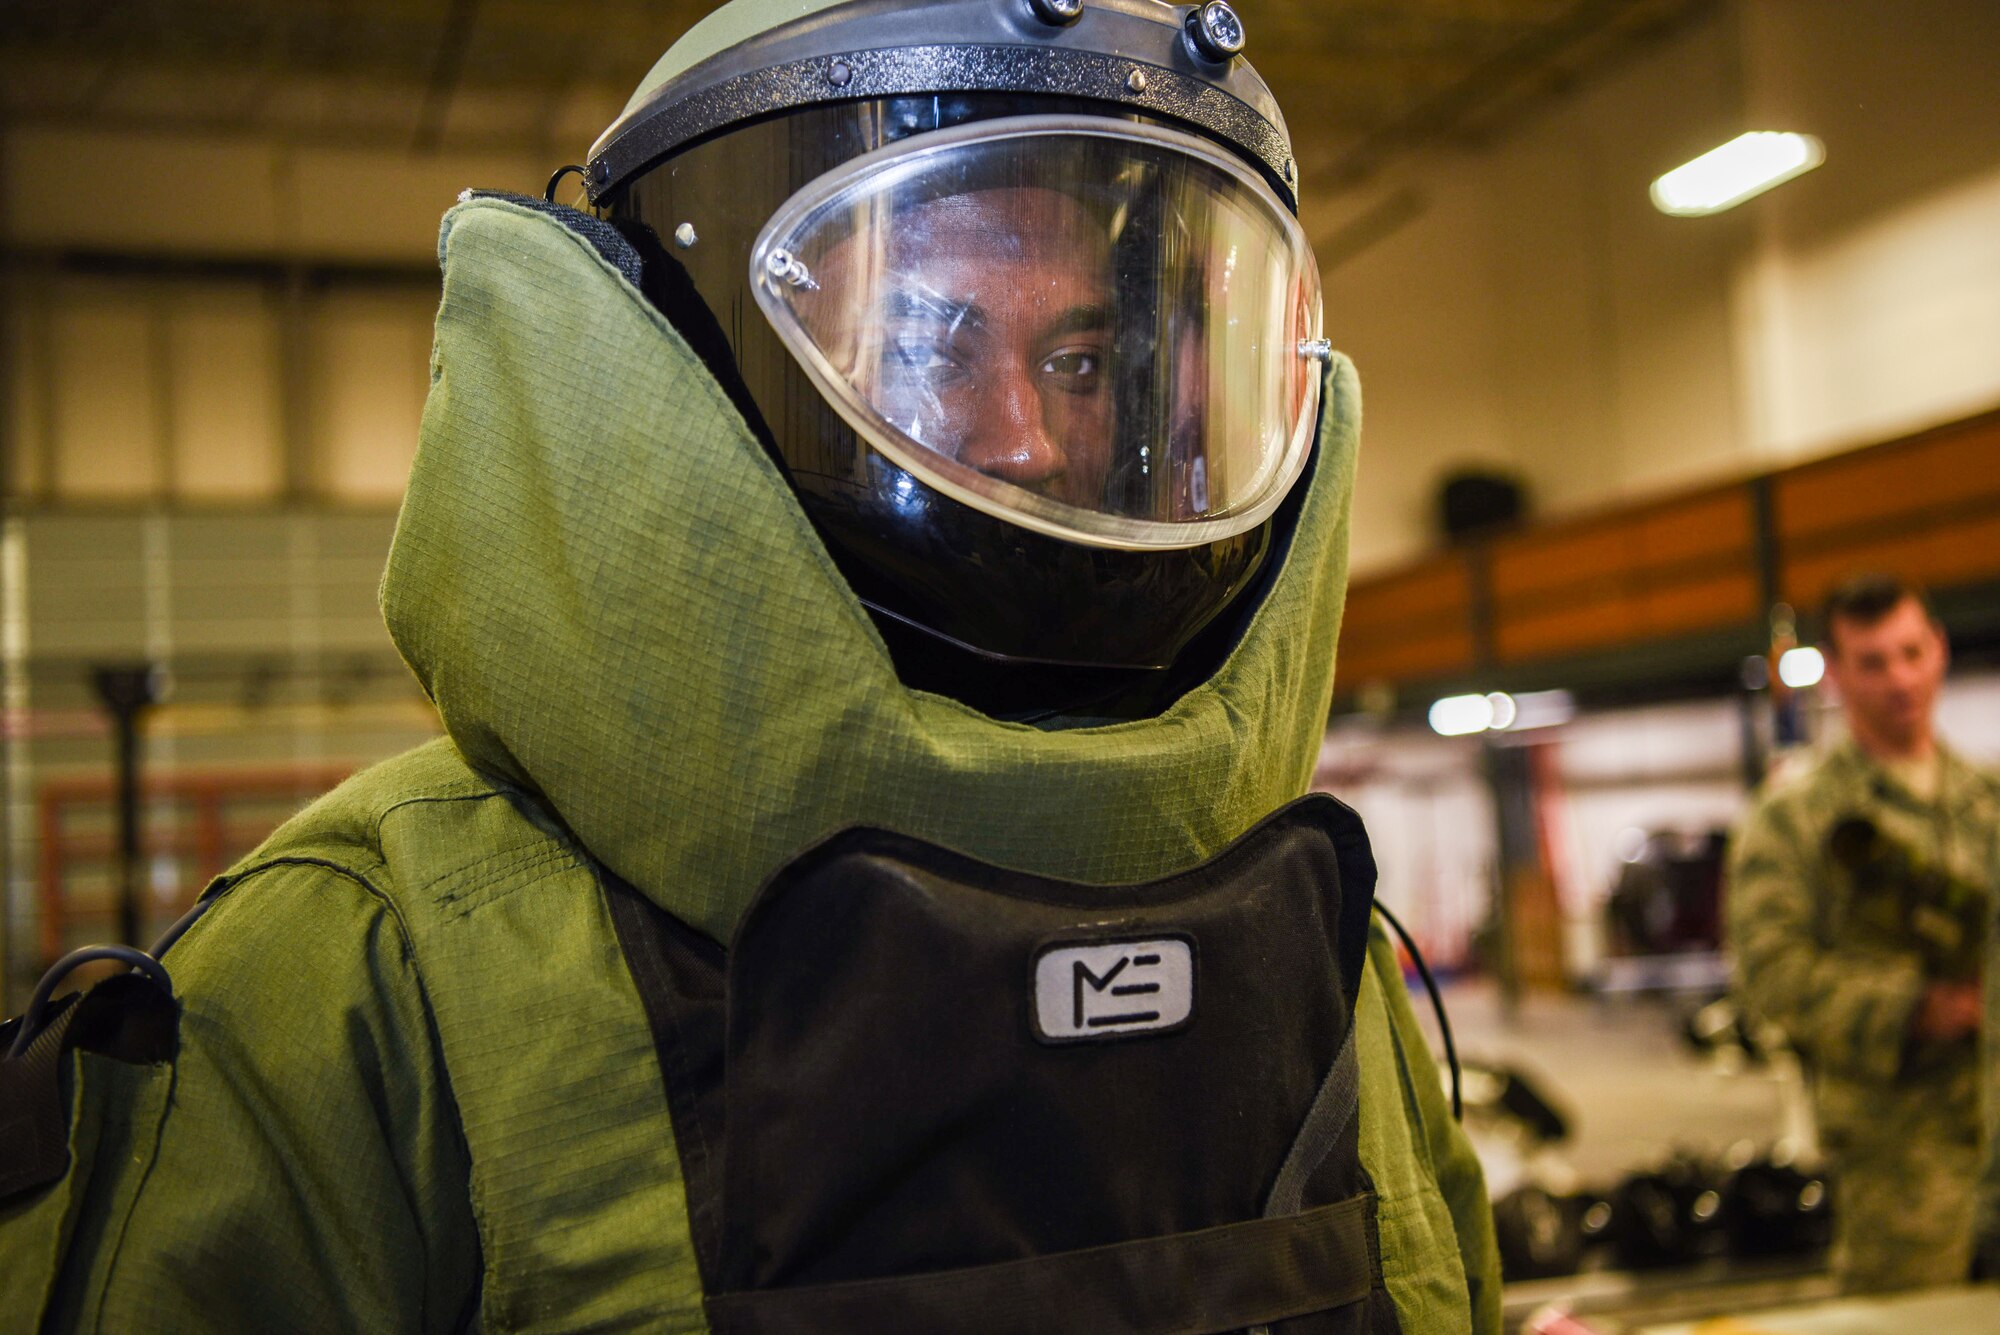 Senior Airman Markus Matthews, 90th Security Forces Group defender, tries on a blast suit while visiting the 90th Civil Engineering Squadron’s Explosive Ordnance Disposal section during the Mission Immersion Day at F.E. Warren Air Force Base, Wyo., Feb. 27, 2018. The Airmen got a hands on look of the training tools used to prepare the EOD team for possible situations. The Mission Immersion Day was put together to allow Airmen the opportunity to exercise cross communication between the different career fields on base.  (U.S. Air Force photo by Airman 1st Class Abbigayle Wagner)